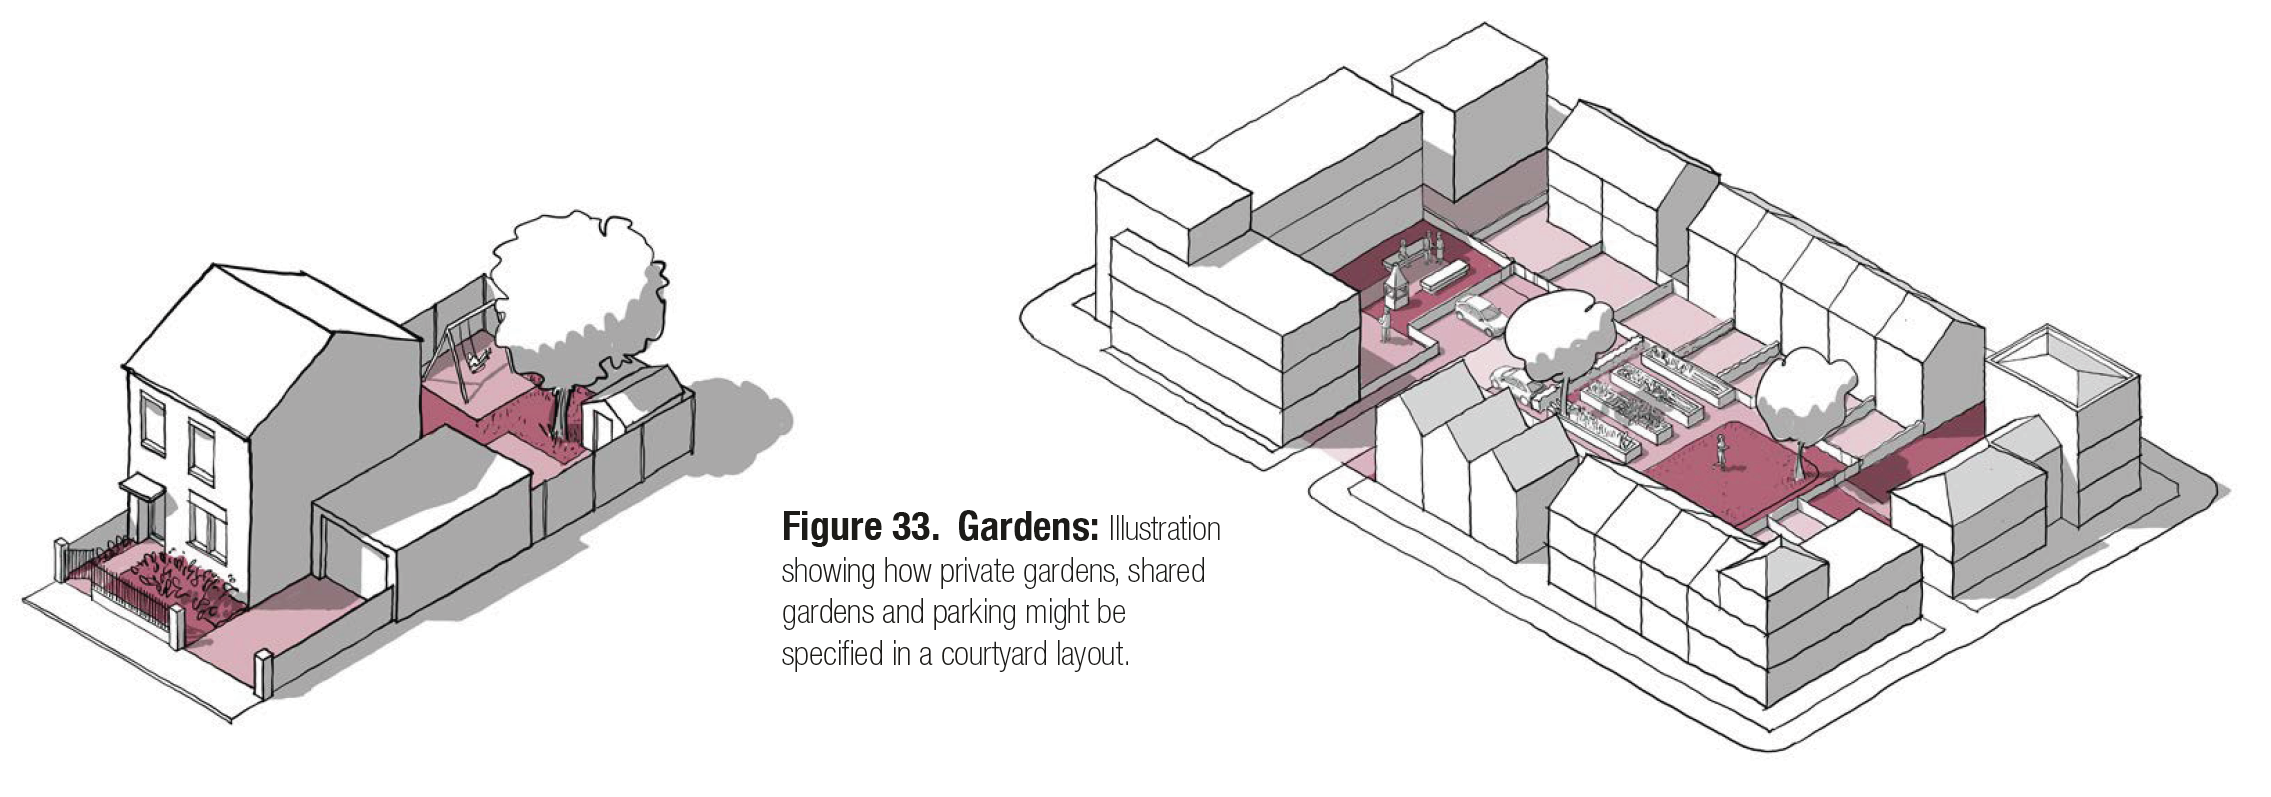 This is a 3D line drawing of a residential block with different heights and types of unit around its periphery. The drawing shows how different types of gardens can be specified in a courtyard layout, illustrating the text of figure 33.